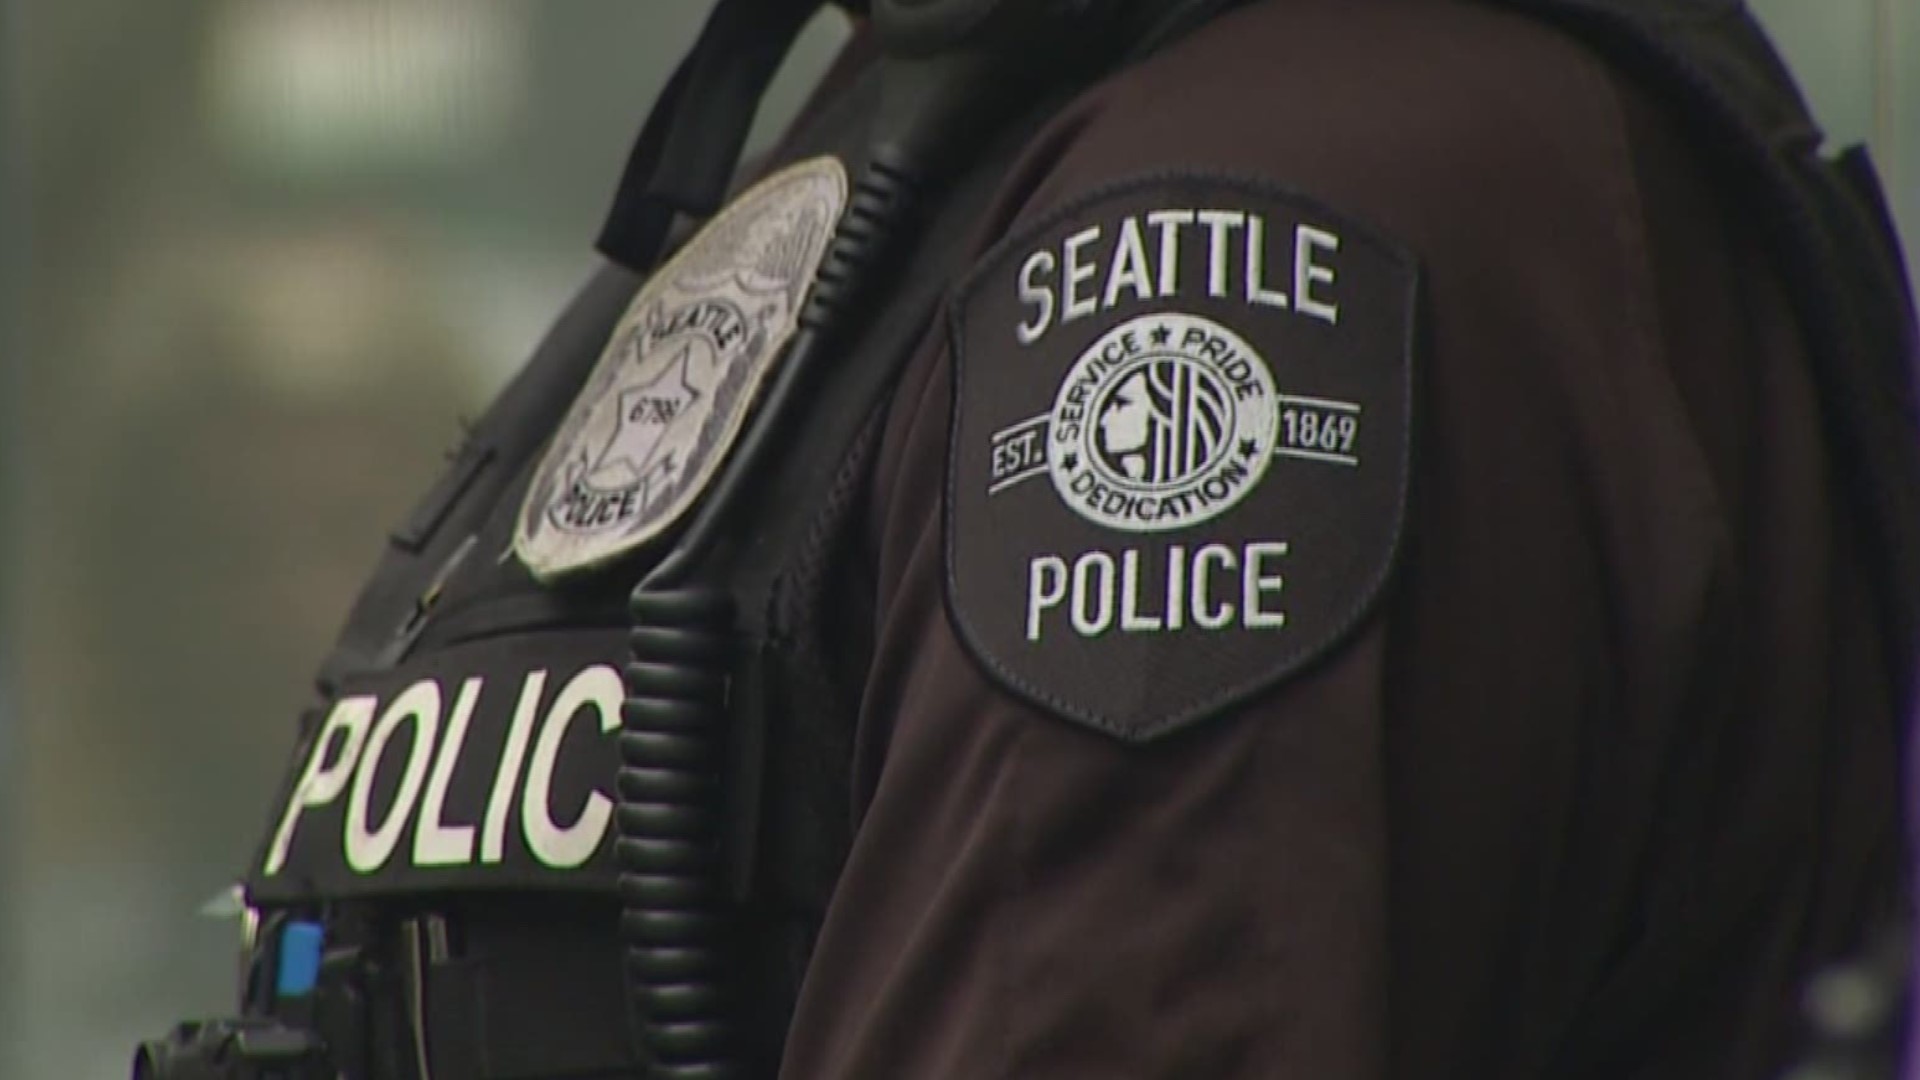 The Seattle Police Department said emphasis patrols in several neighbors are about focusing on what needs to be done in those specific neighborhoods. Officials believe tackling smaller, persistent issues will hopefully take a chunk out of more serious crimes as well.